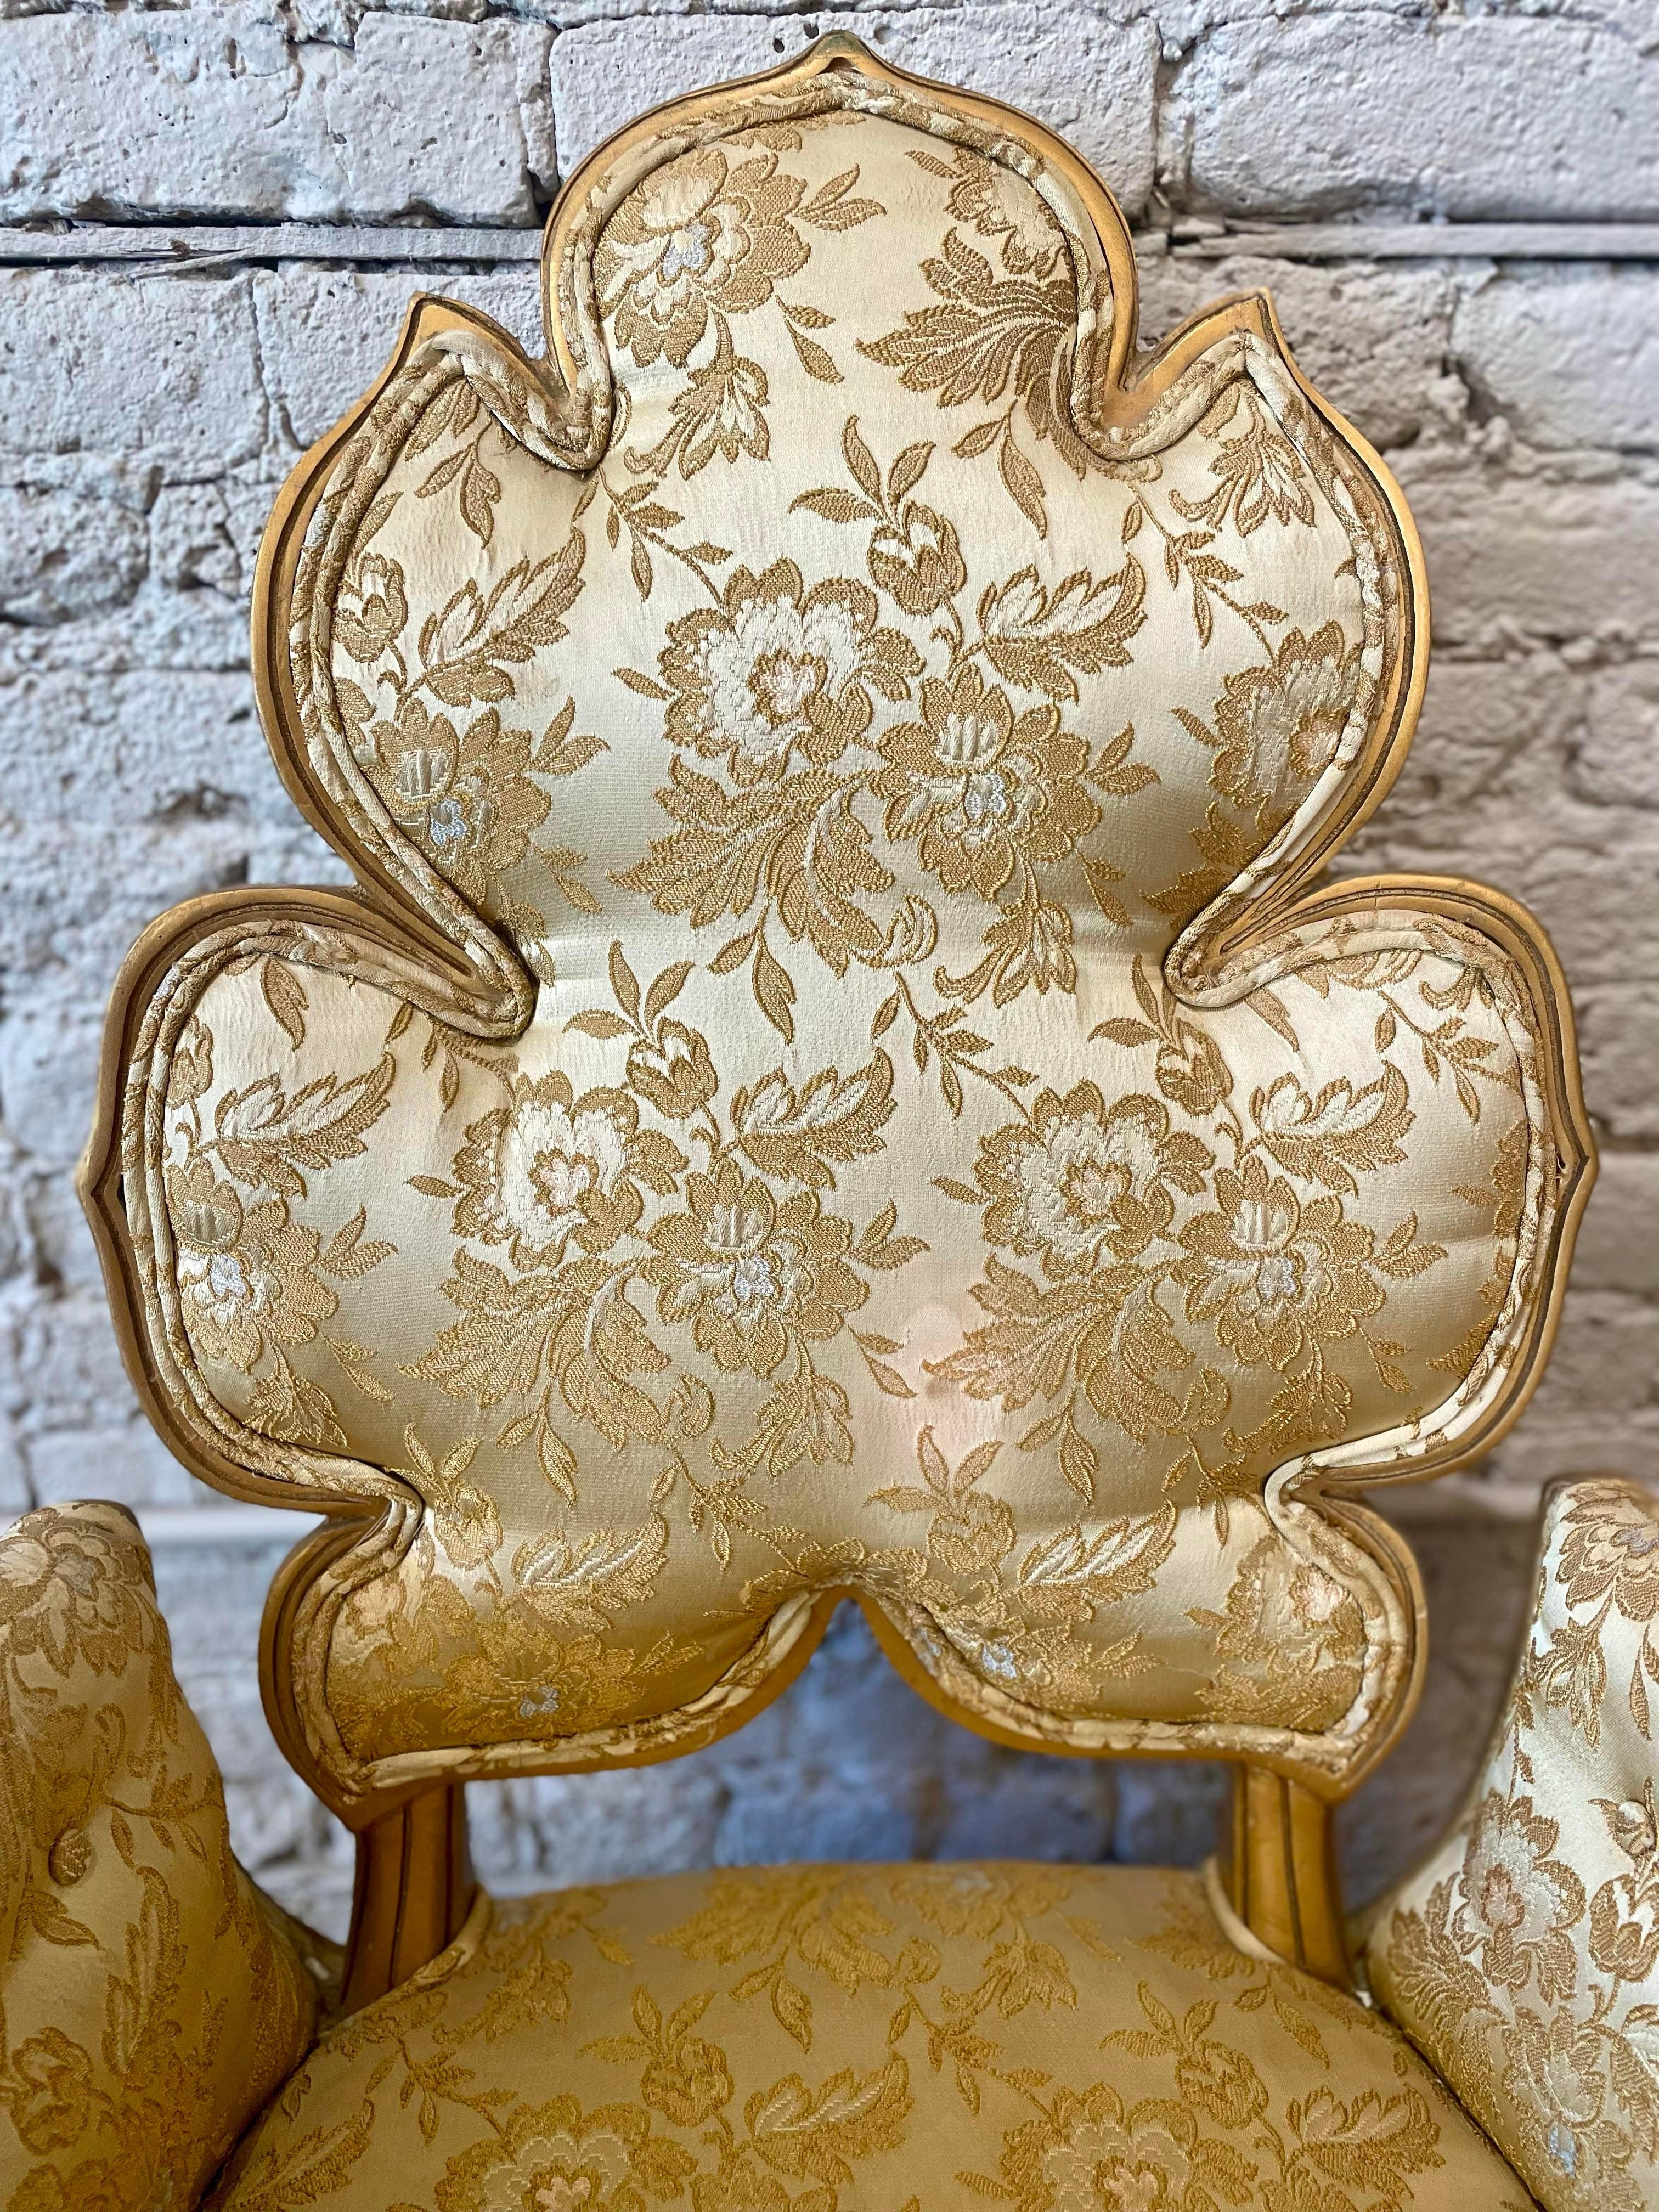 Wood 1940s Grosfeld House Leaf Flower Chairs - a Pair For Sale